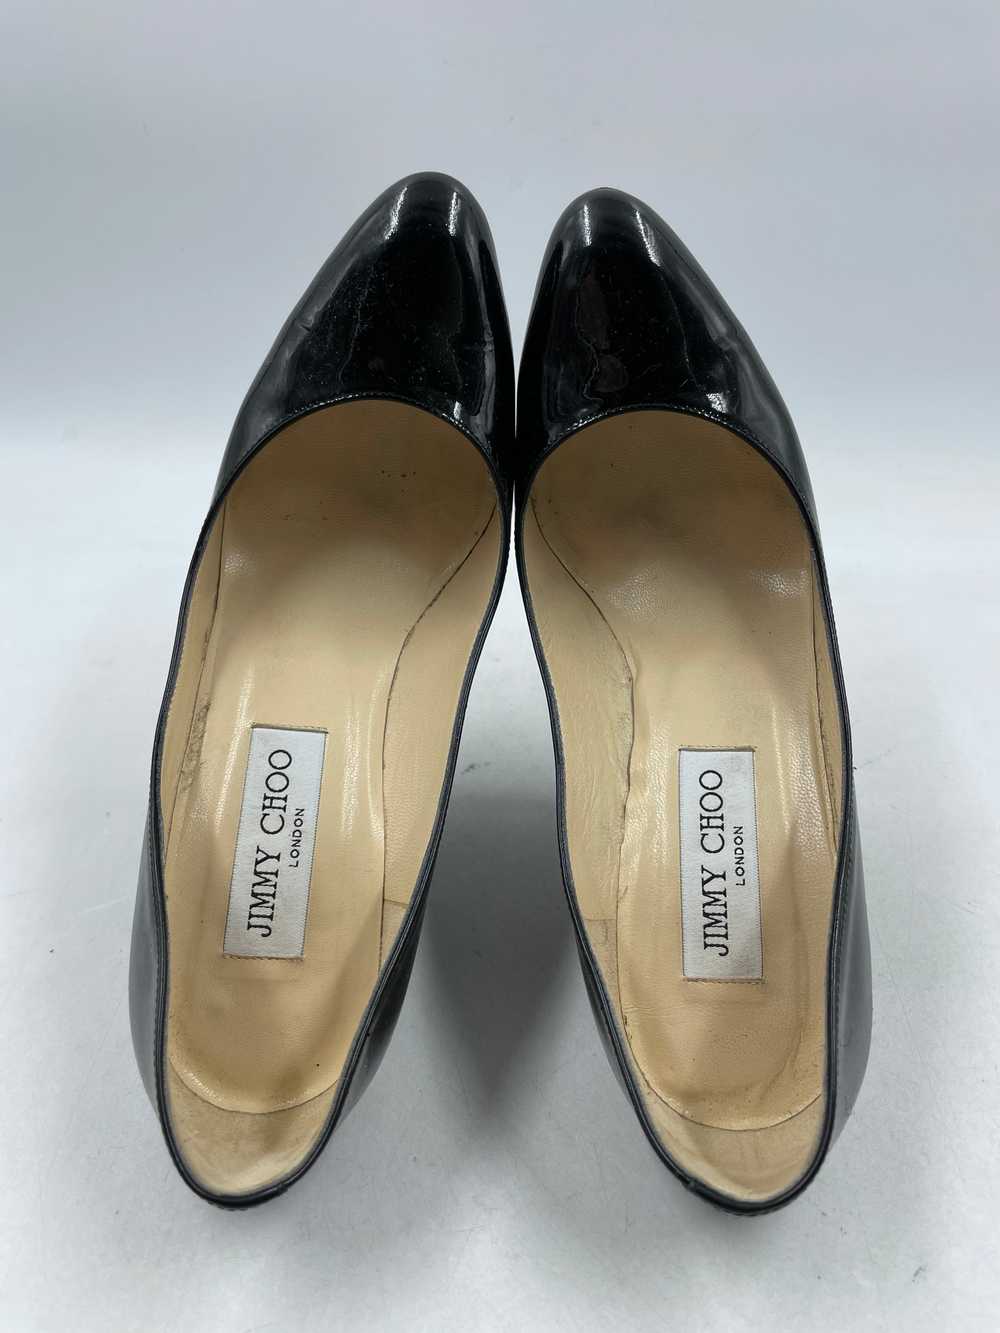 Authentic Jimmy Choo Black Patent Wedge Pumps W 7 - image 6